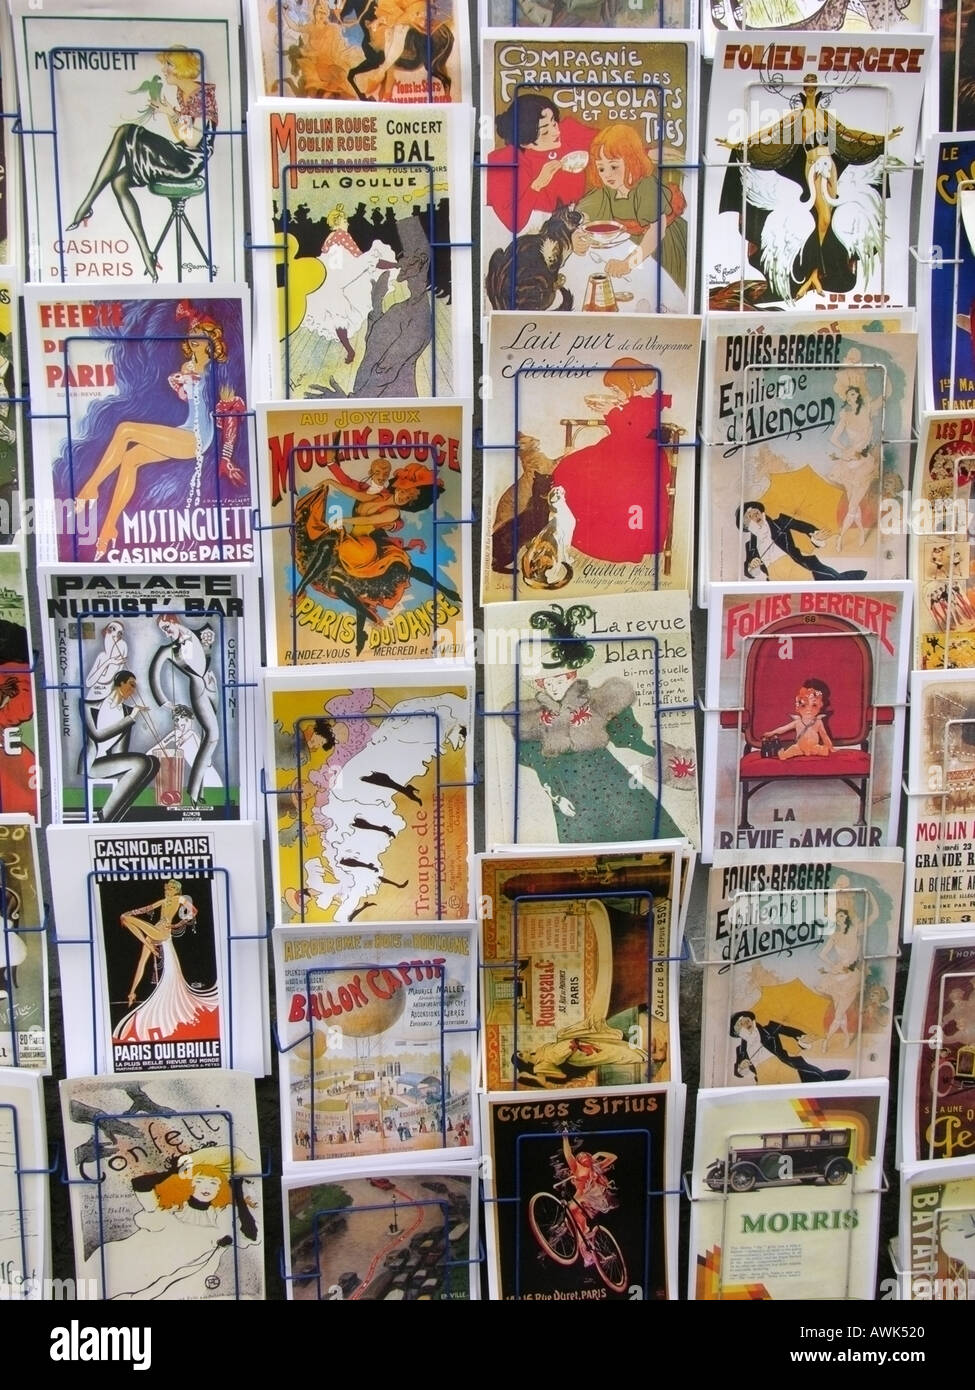 display of postcards showing popular posters by Toulouse Lautrec and other artists in montmartre paris Stock Photo